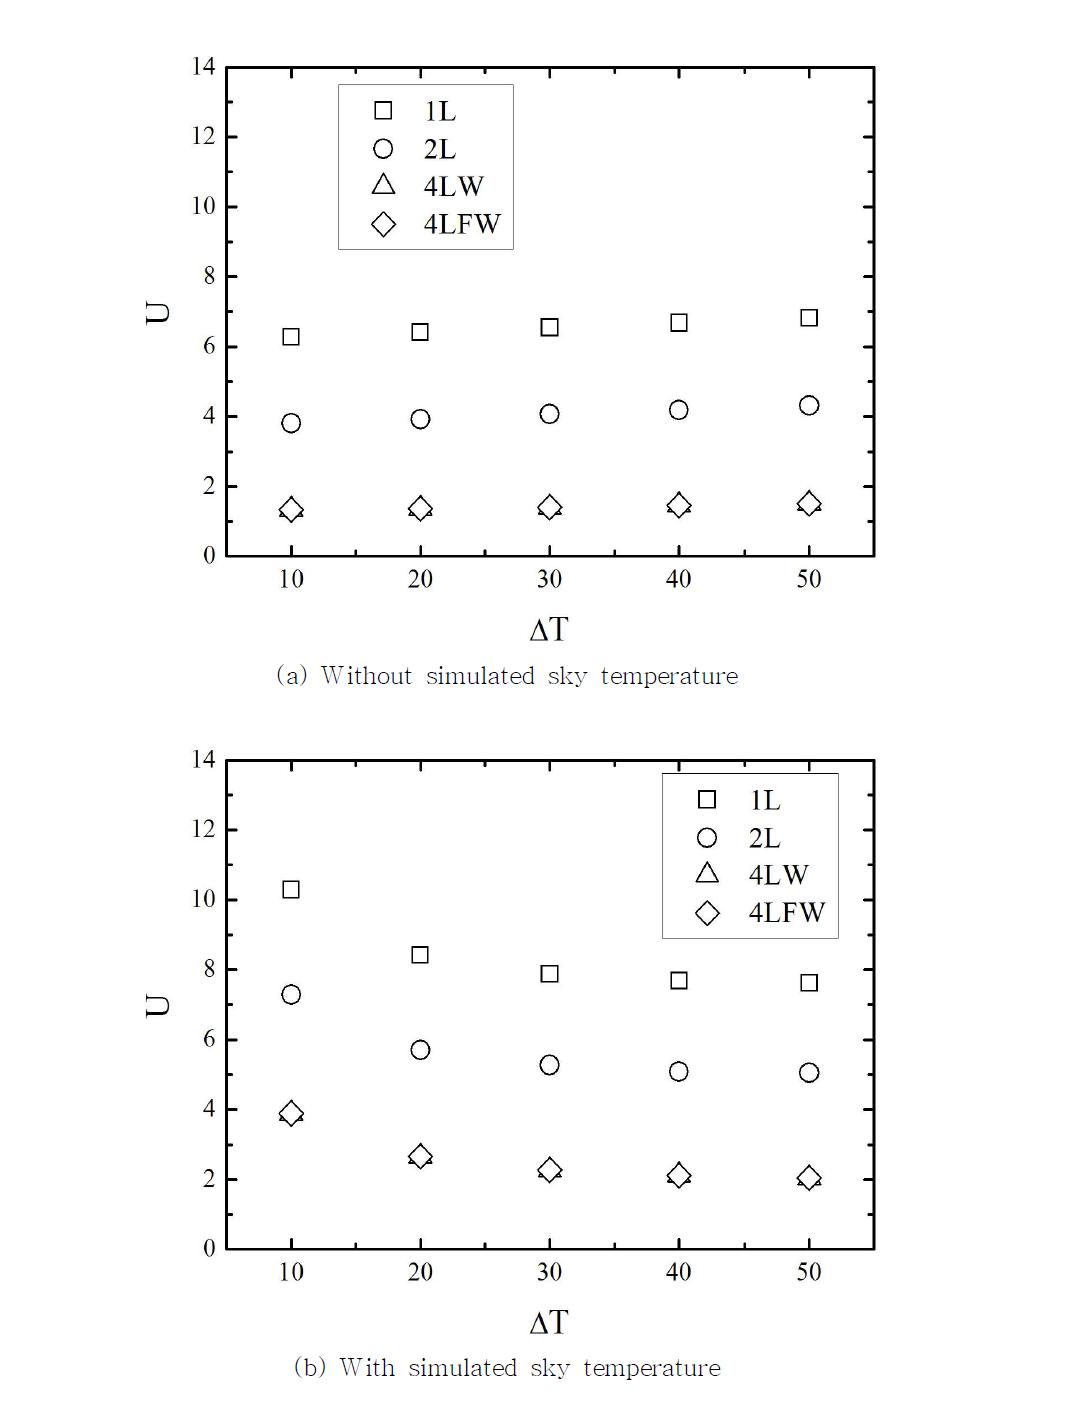 Comparison of overall heat transfer coefficients for various covering materials